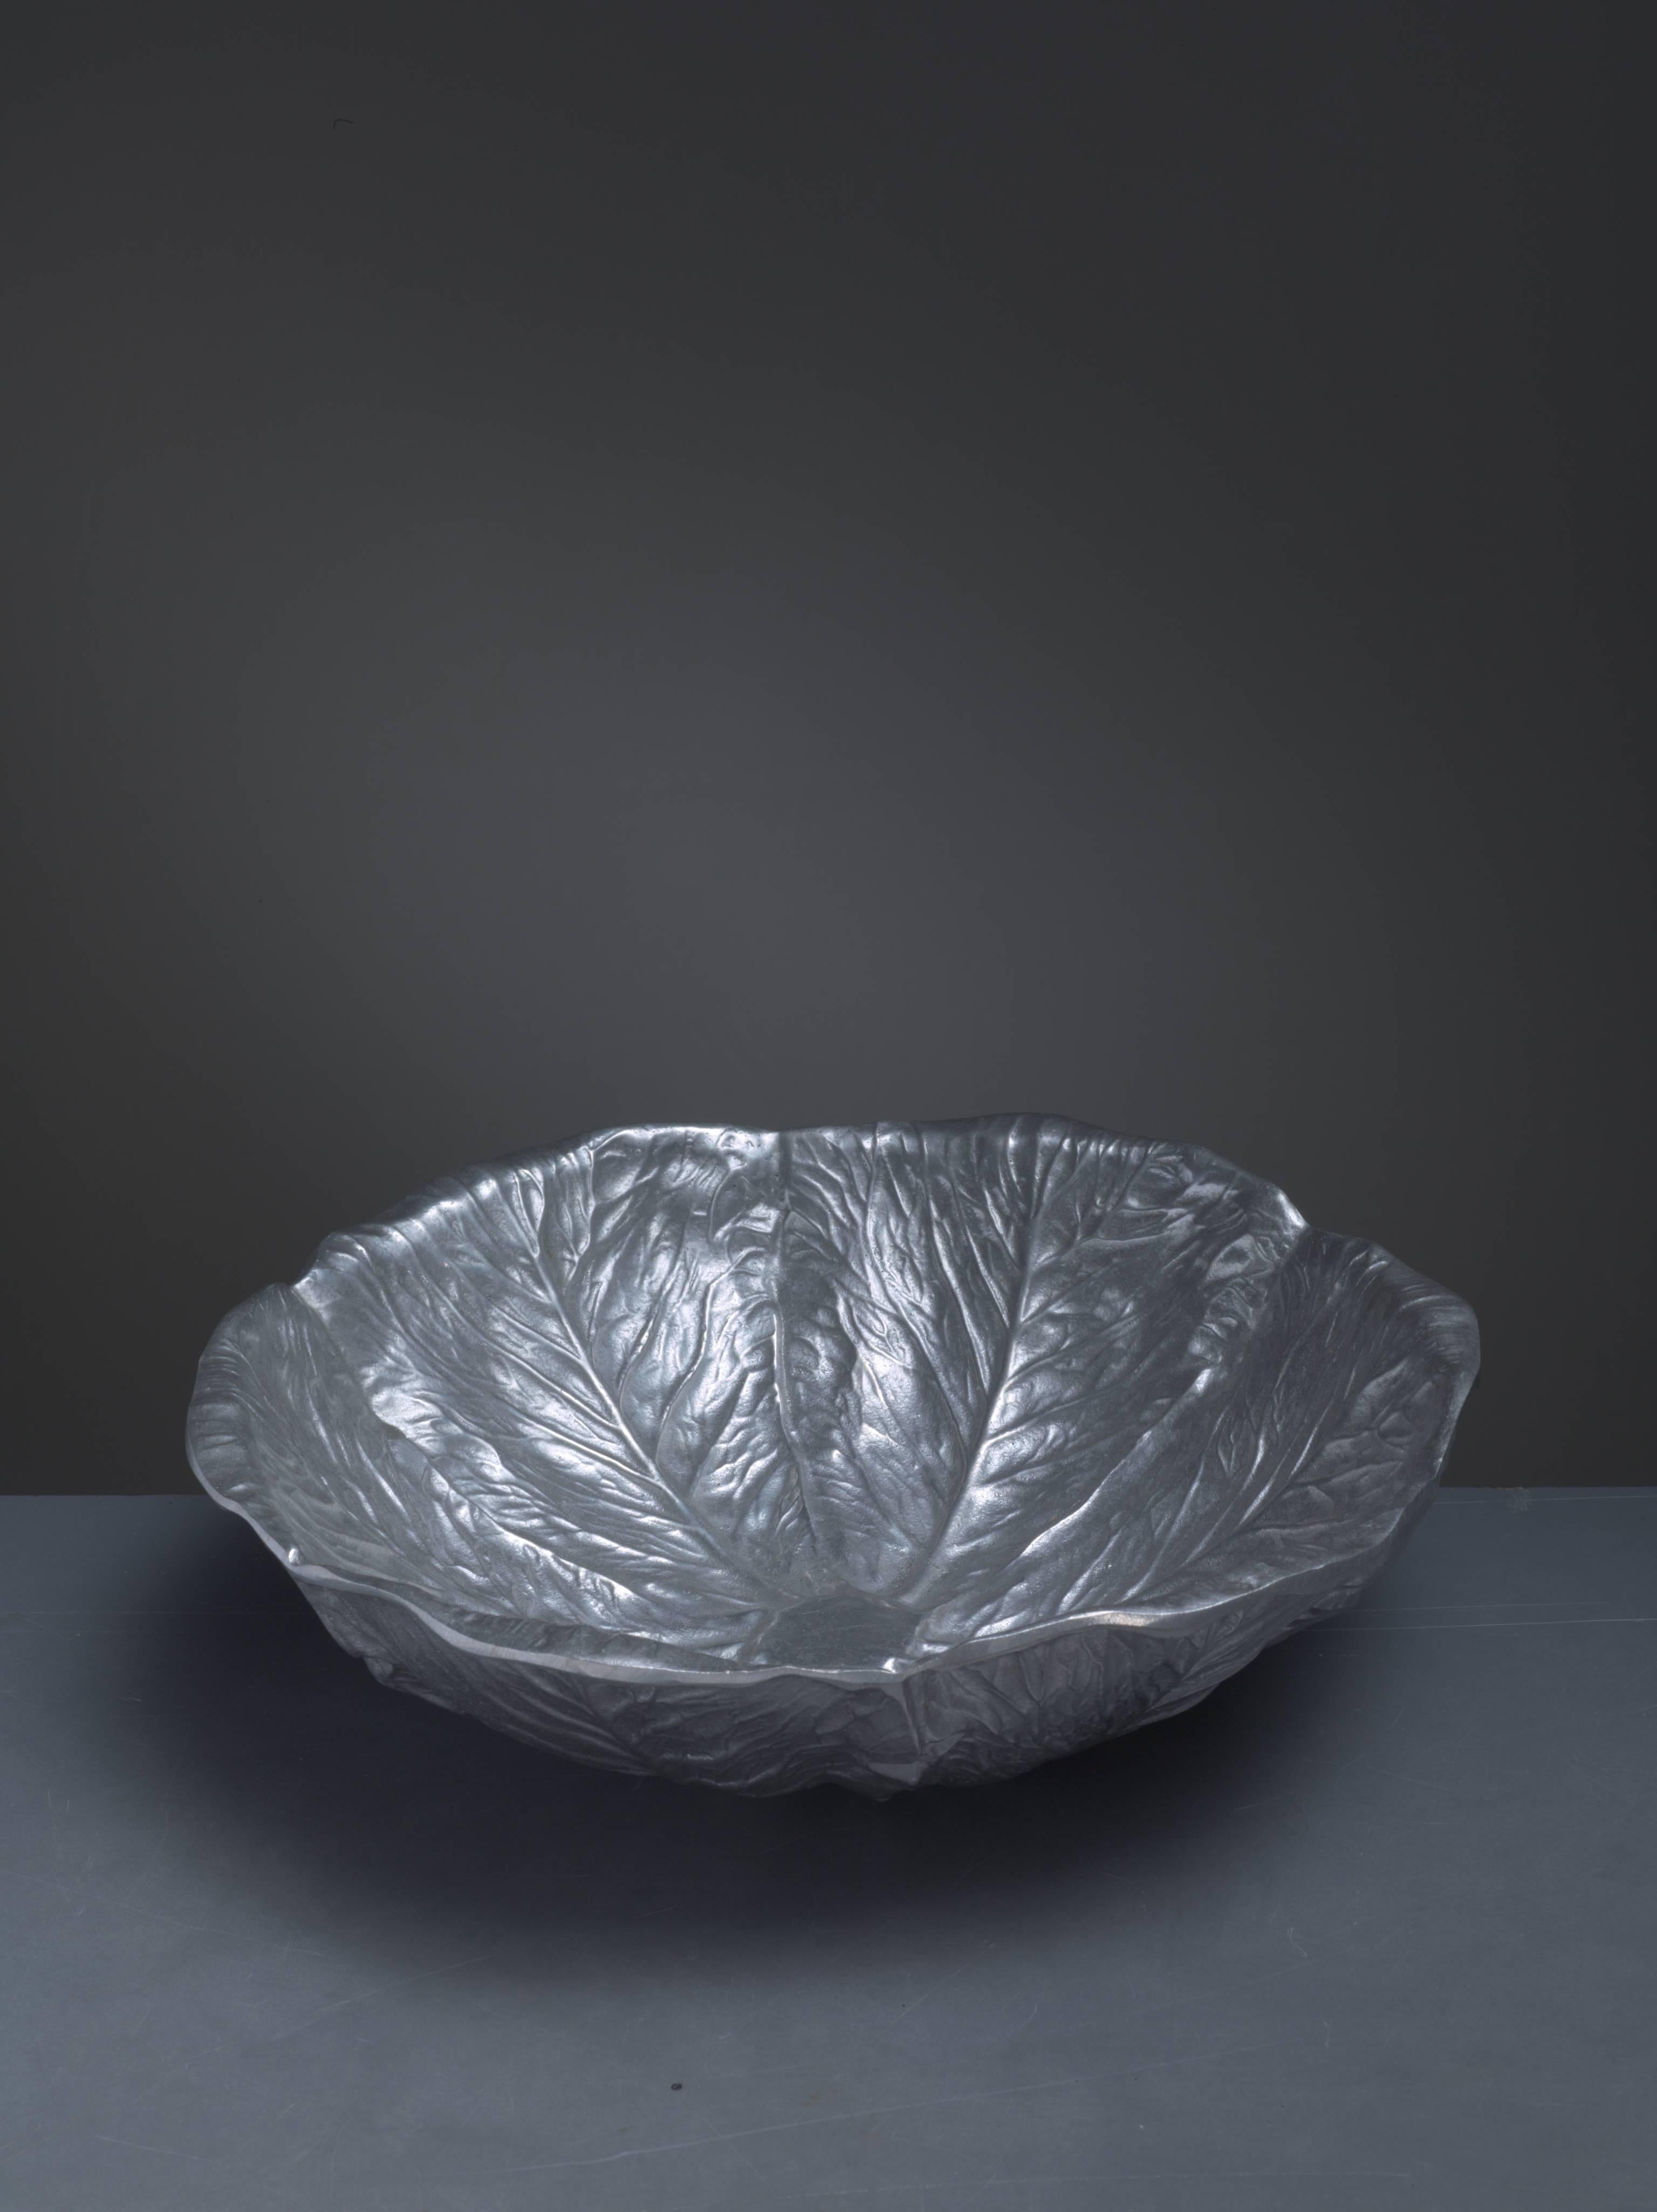 An aluminum cabbage leaf shaped bowl by Bruce Fox for the Wilton Company.
Marked and in a good condition.